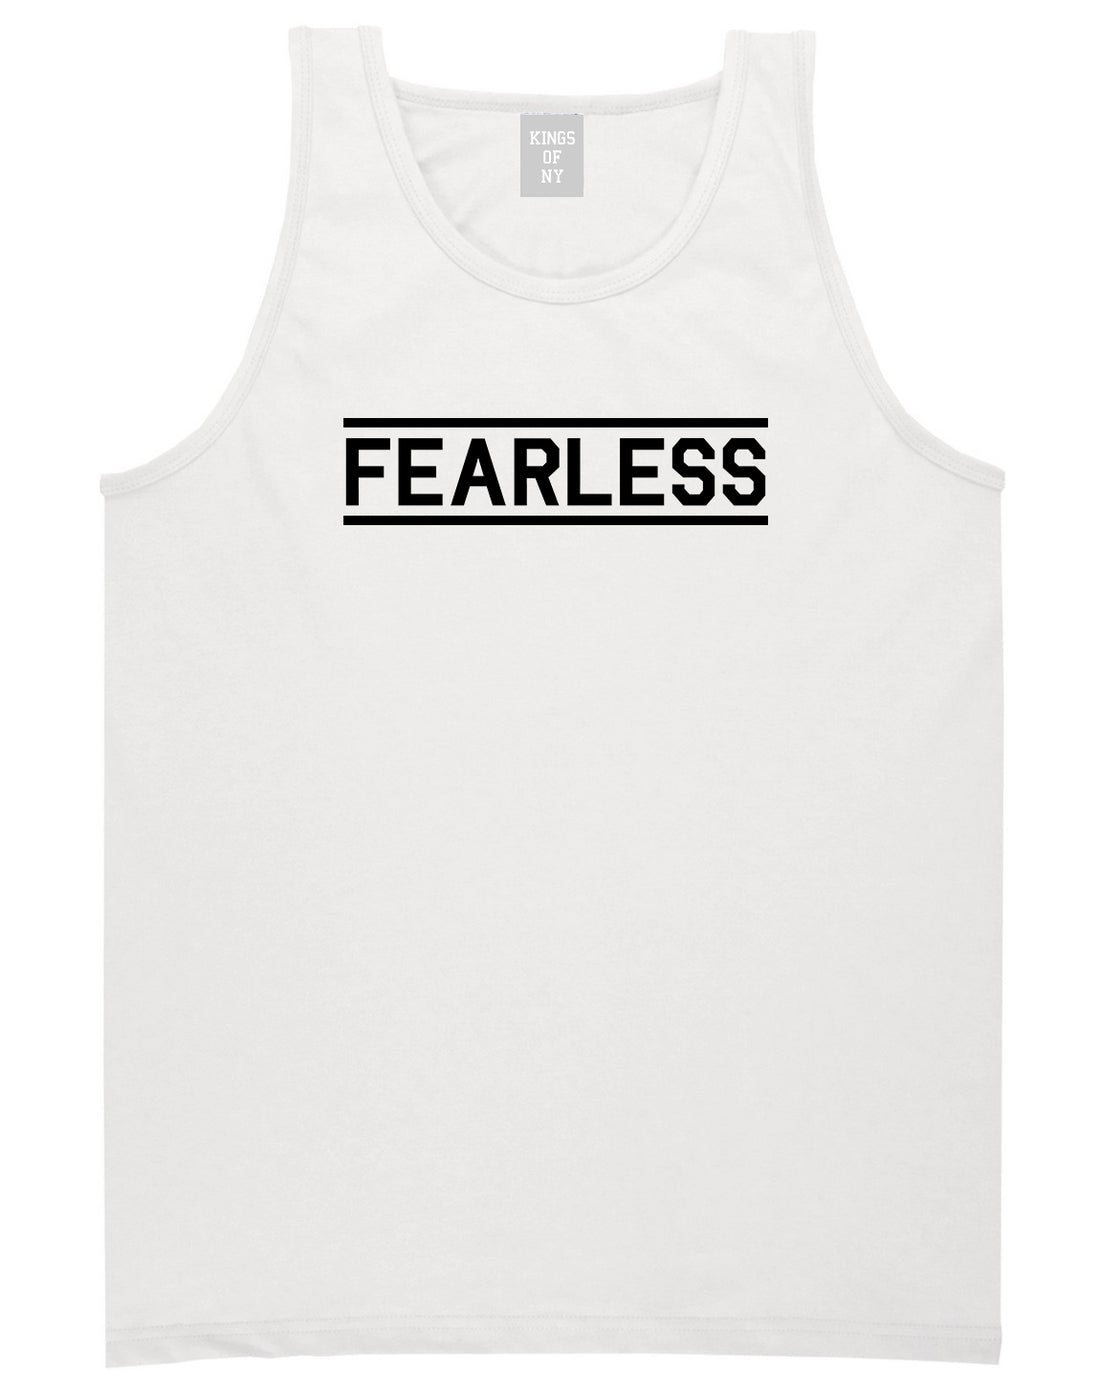 Fearless Gym Mens White Tank Top Shirt by KINGS OF NY